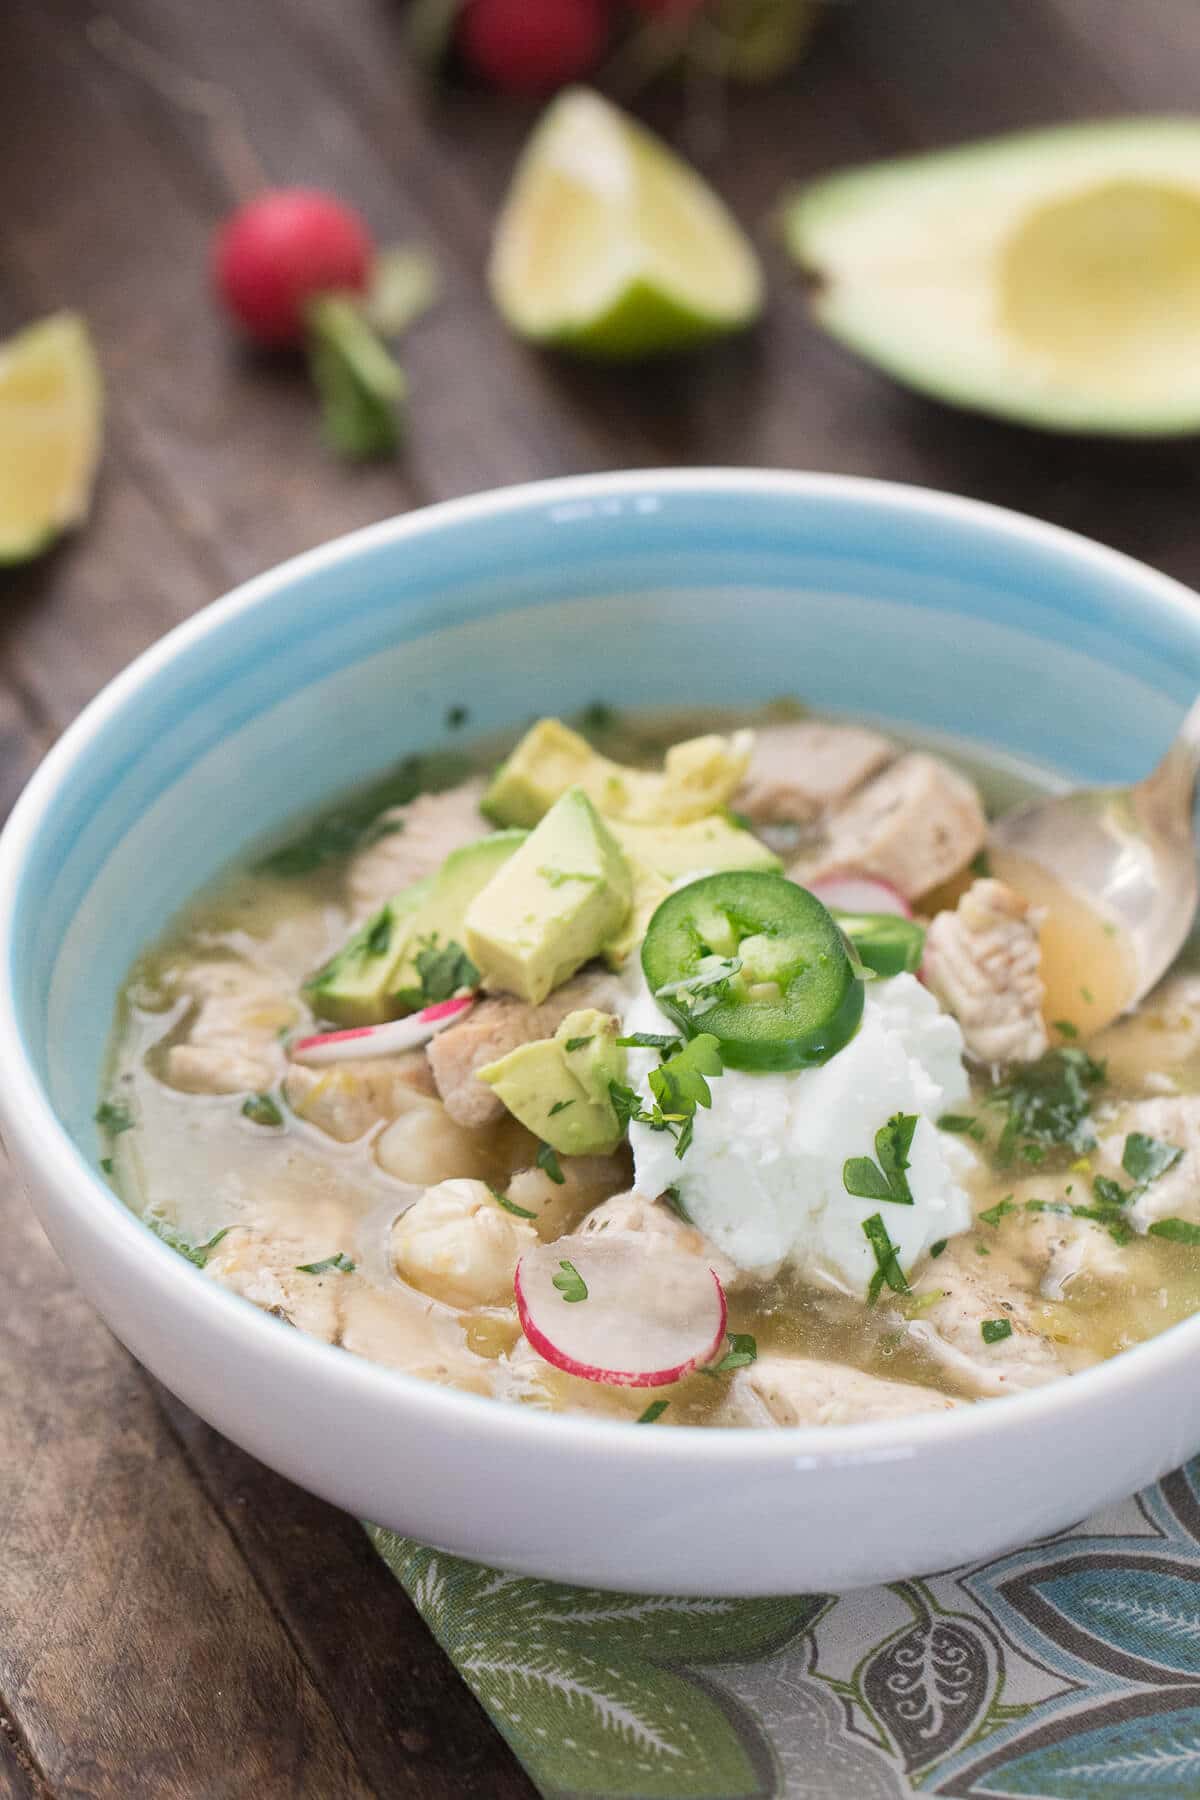 This turkey posole is real good family food. It is hearty and full of spice that will warm everyone!